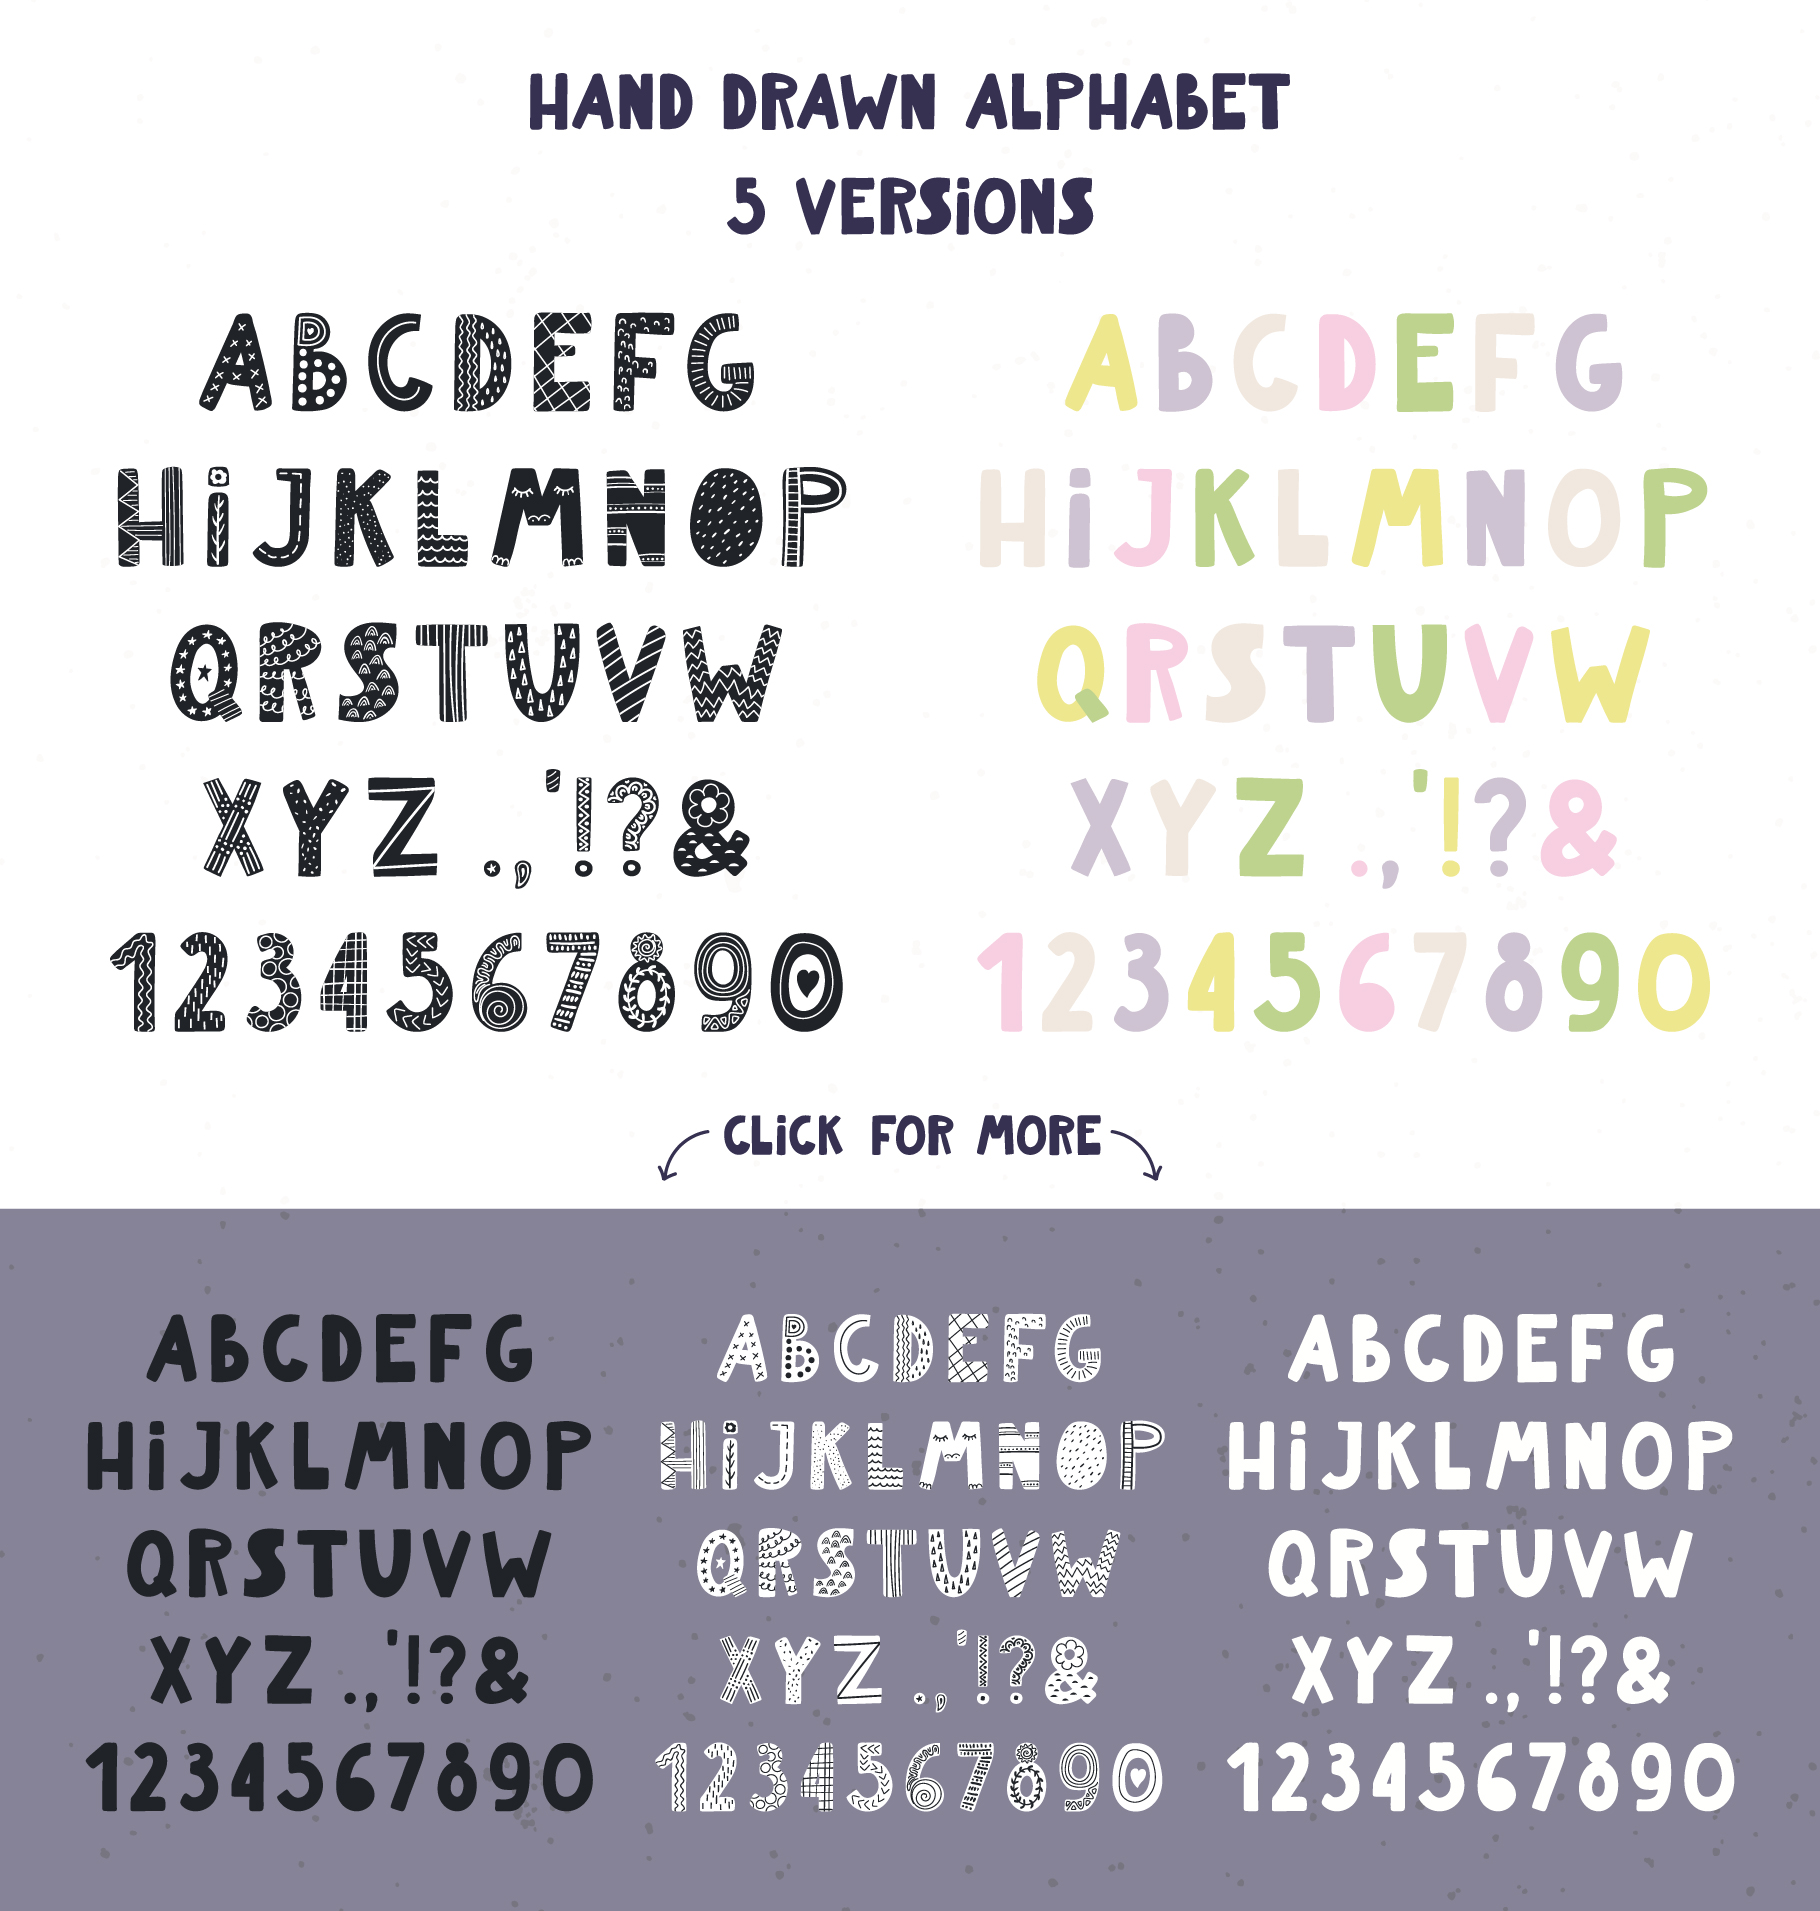 Alphabet font prediction in different styles.